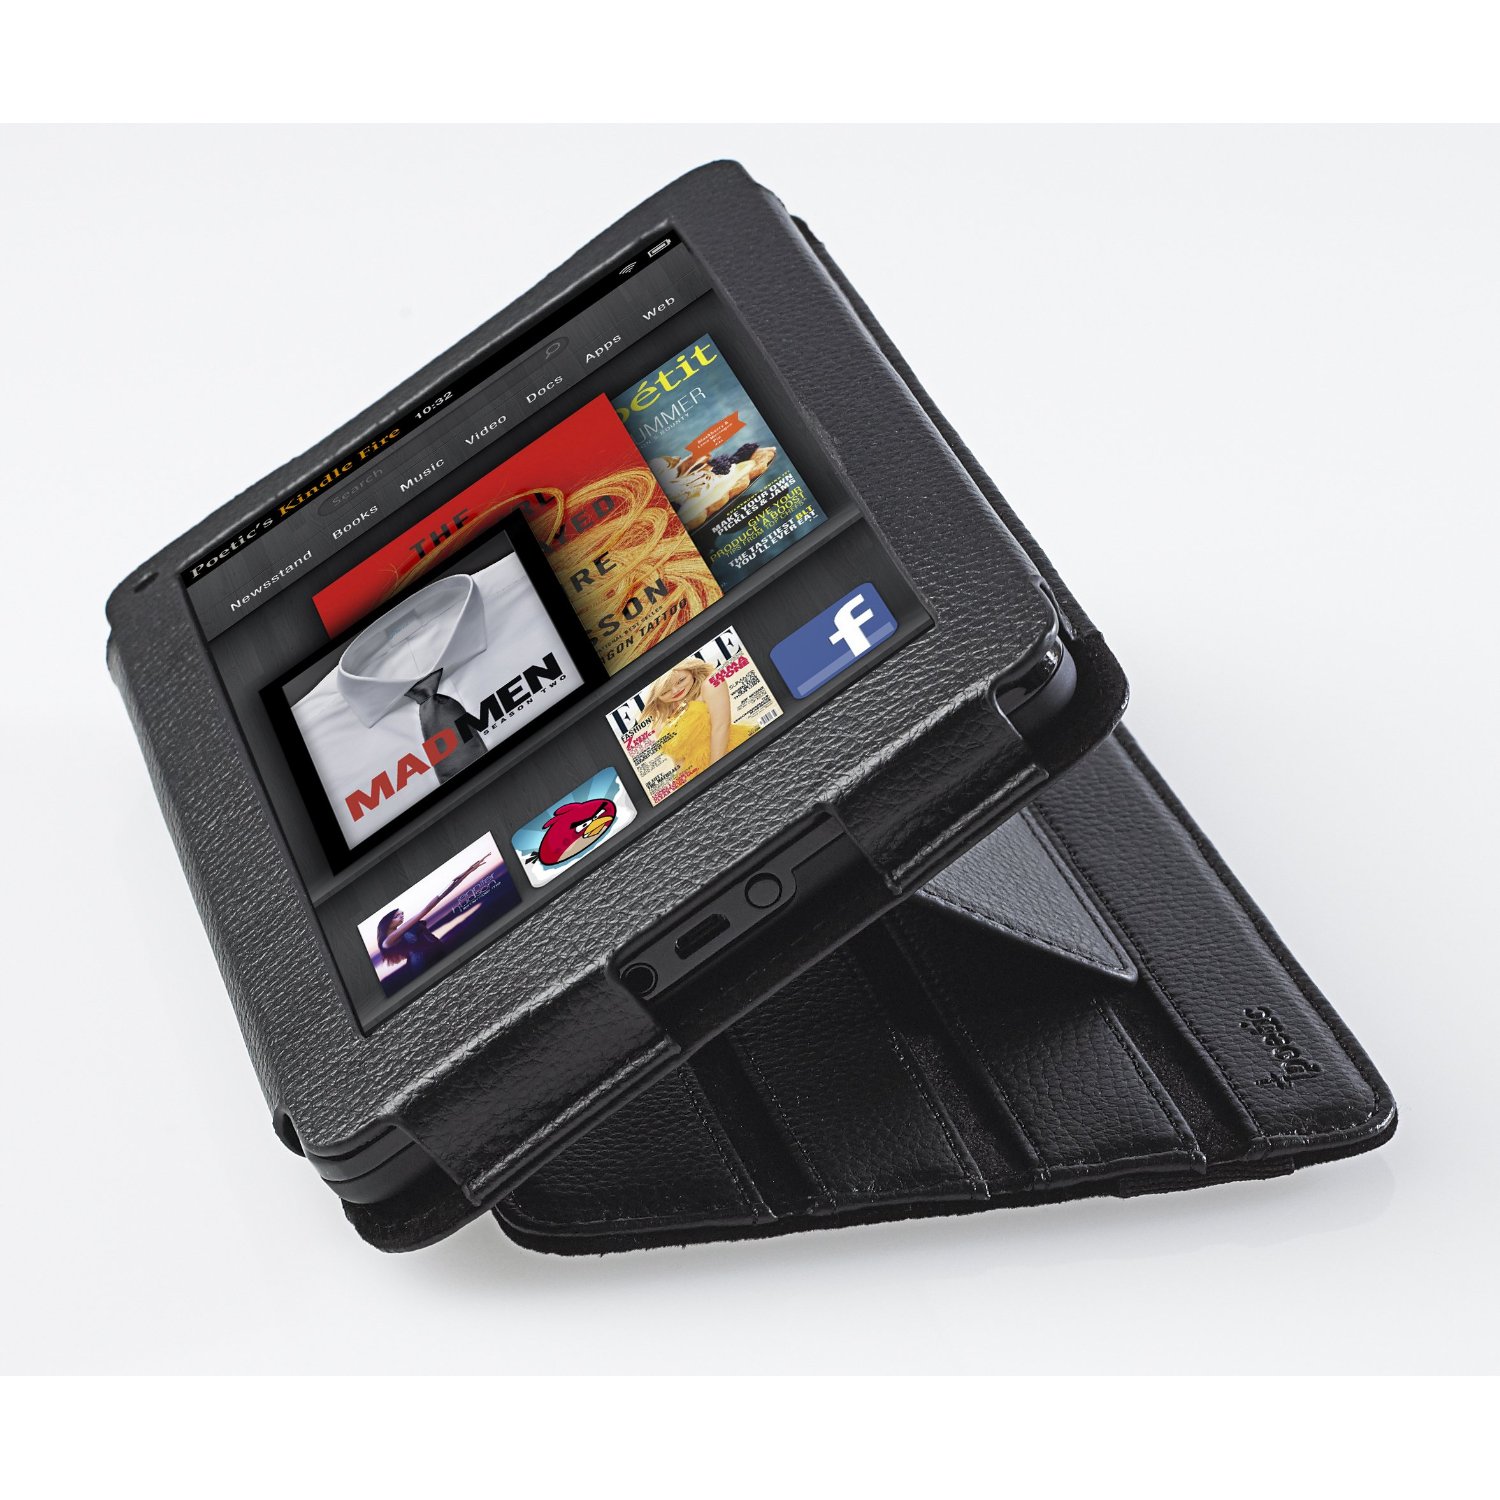 Poetic FrontLine Stylish Leather Folio Case for Amazon Kindle Fire With Stand $12.95